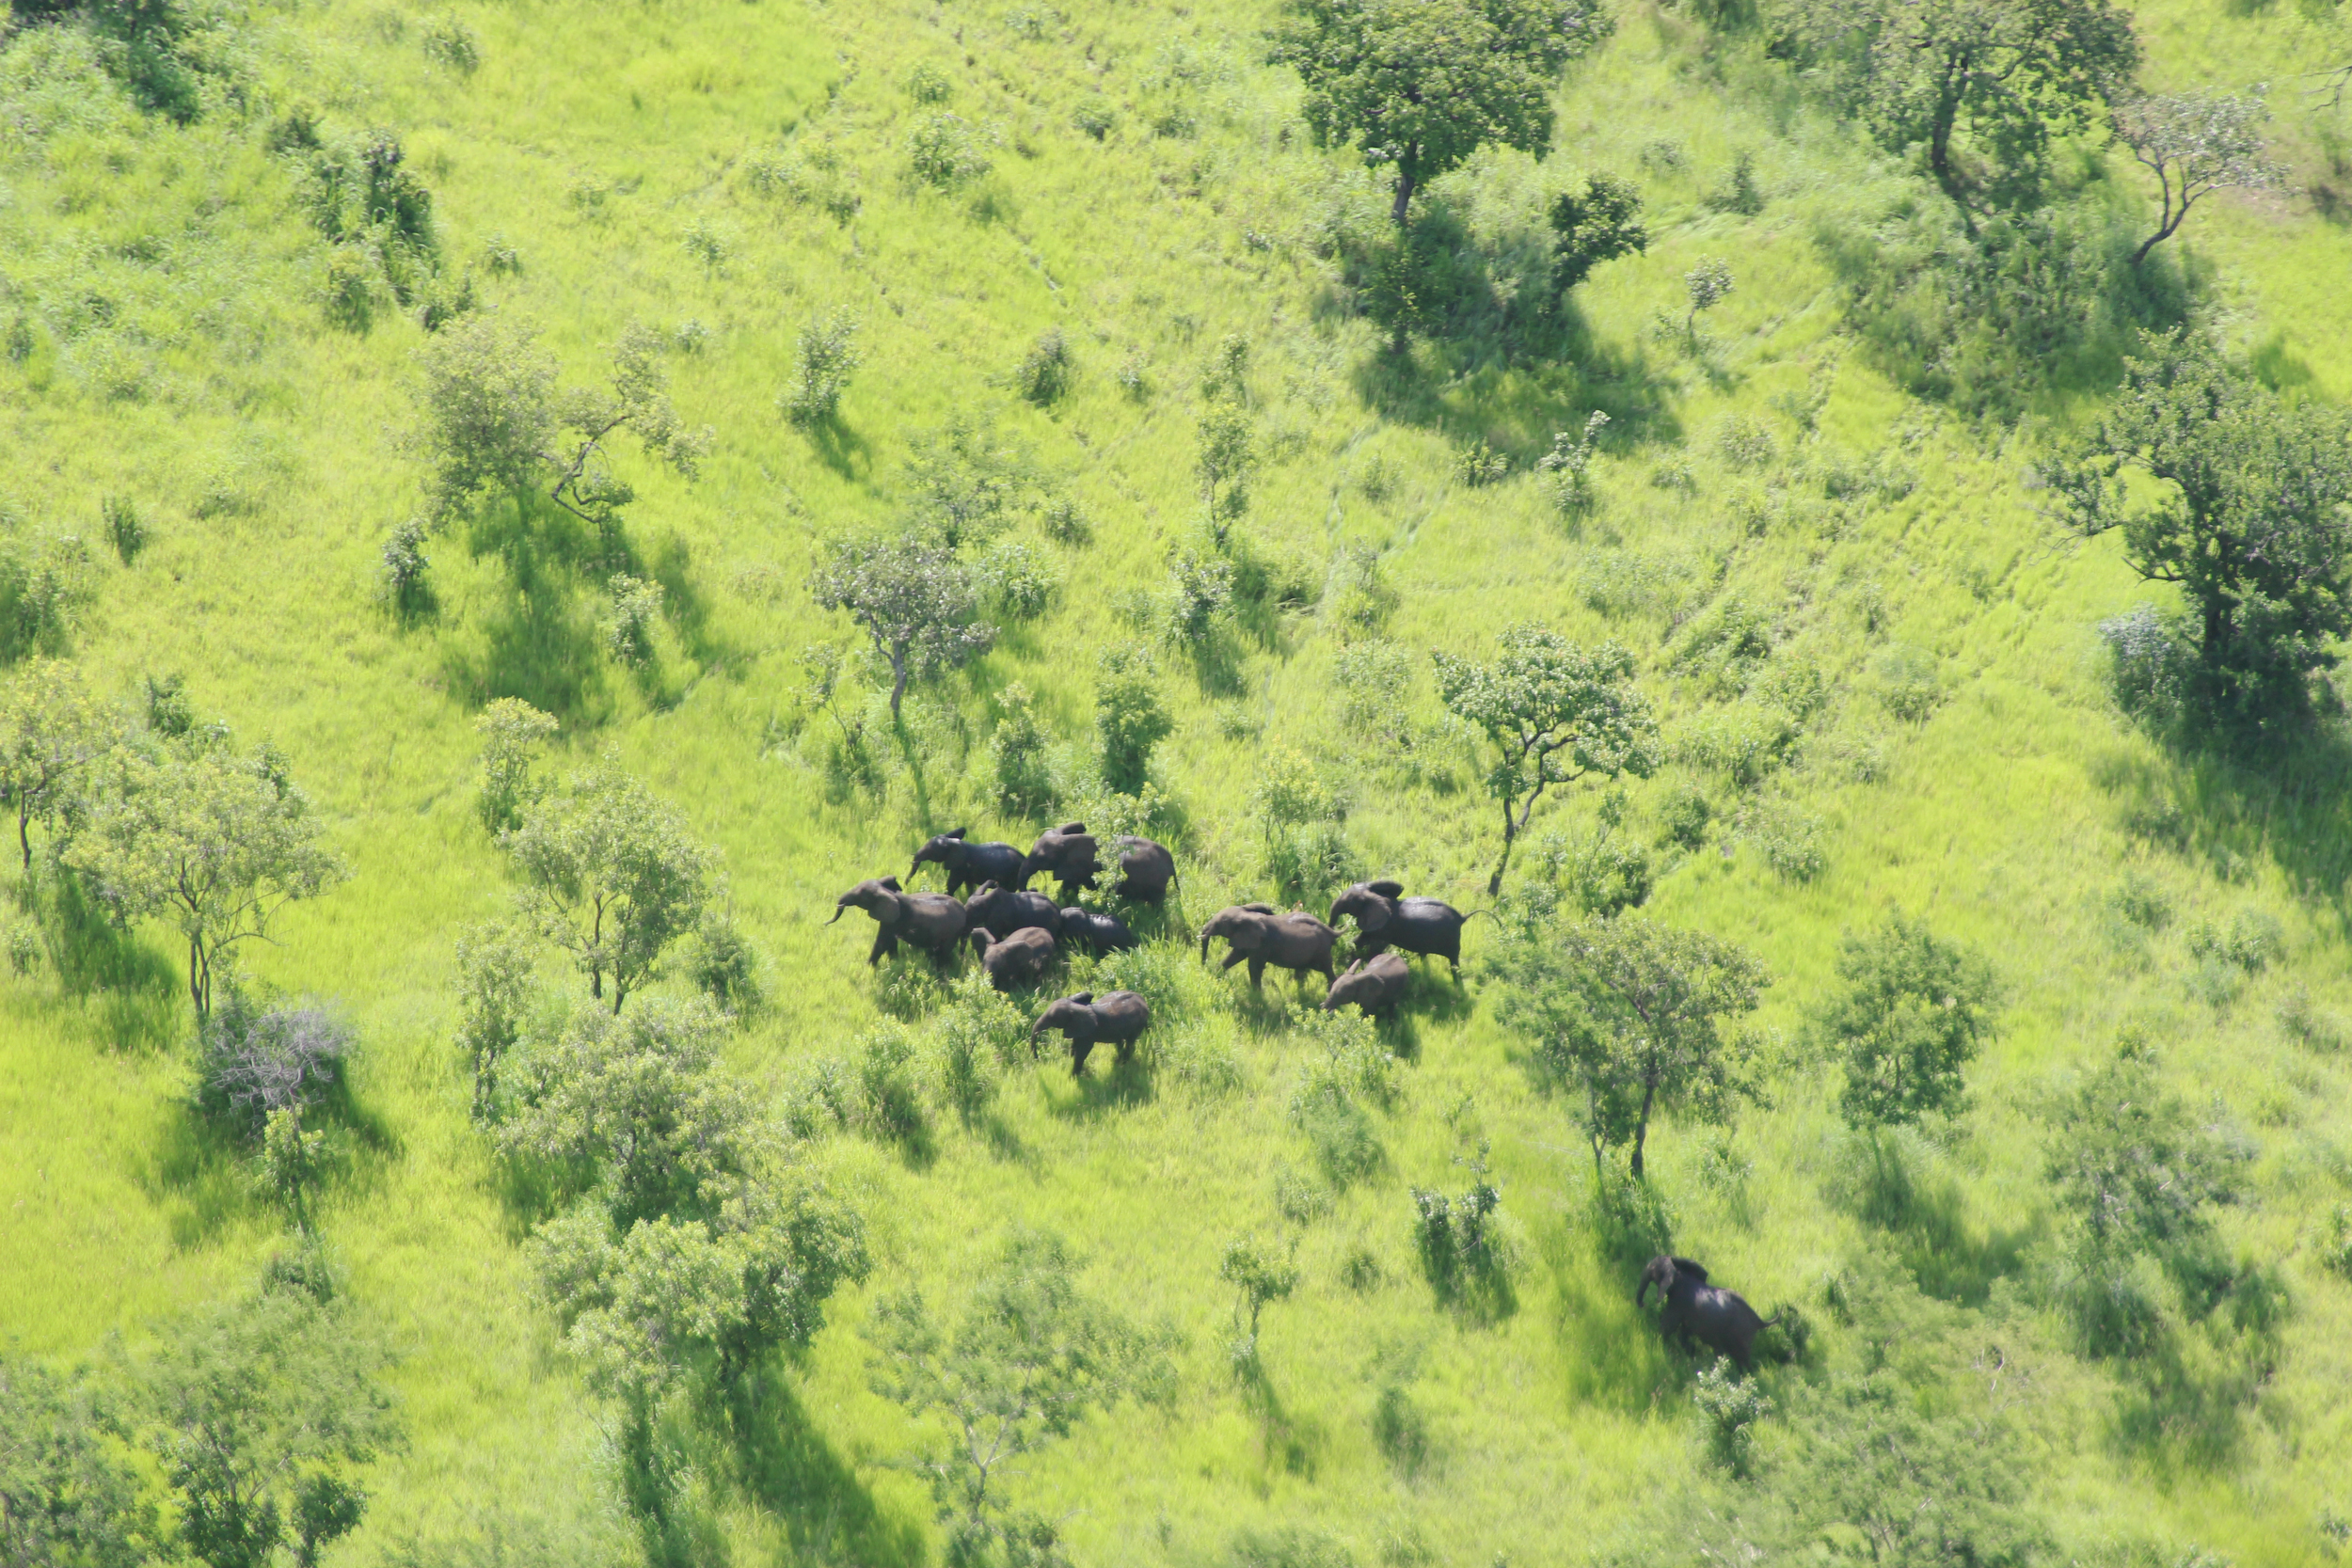 PHOTO: Elephants in the Niassa Reserve in Mozambique.